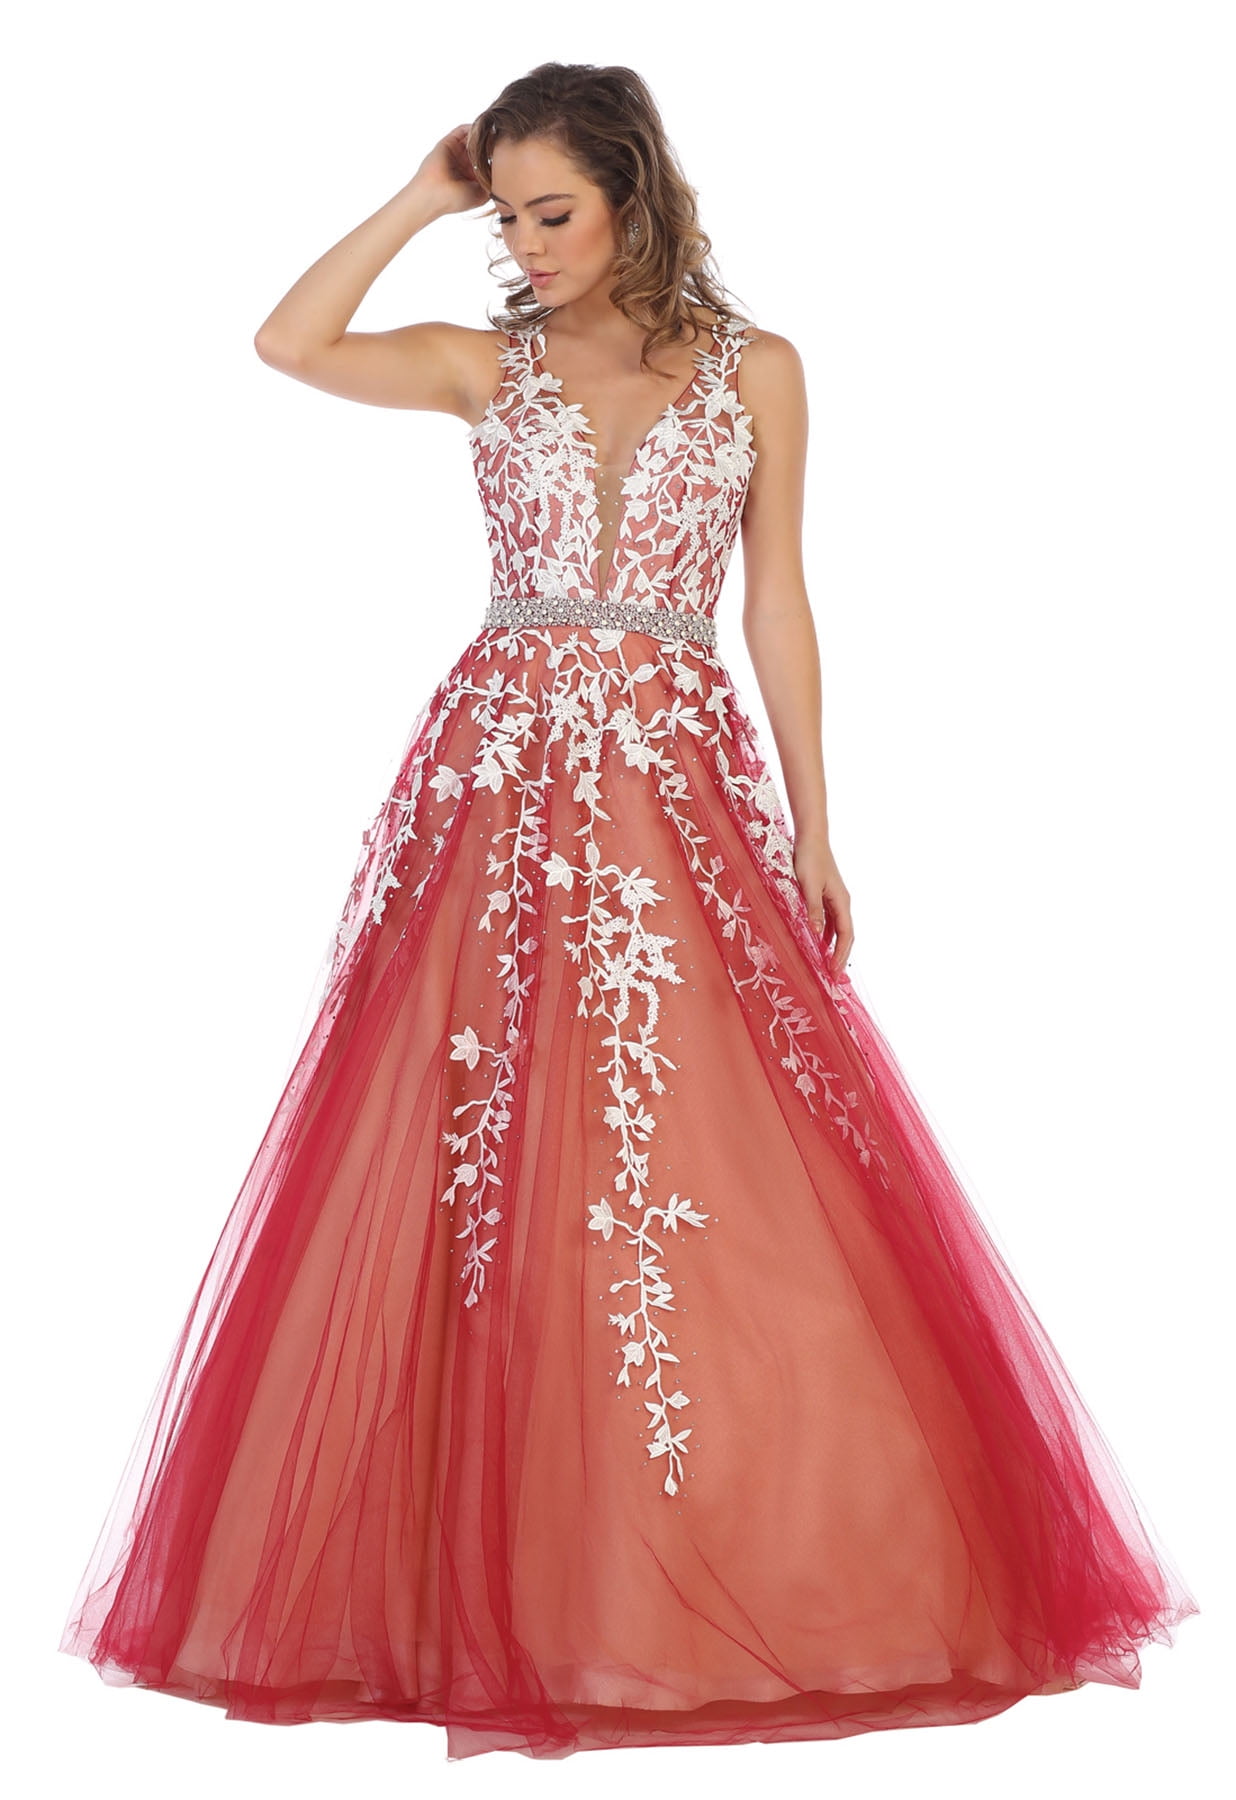 PROM QUEEN FORMAL EVENING GOWN ...